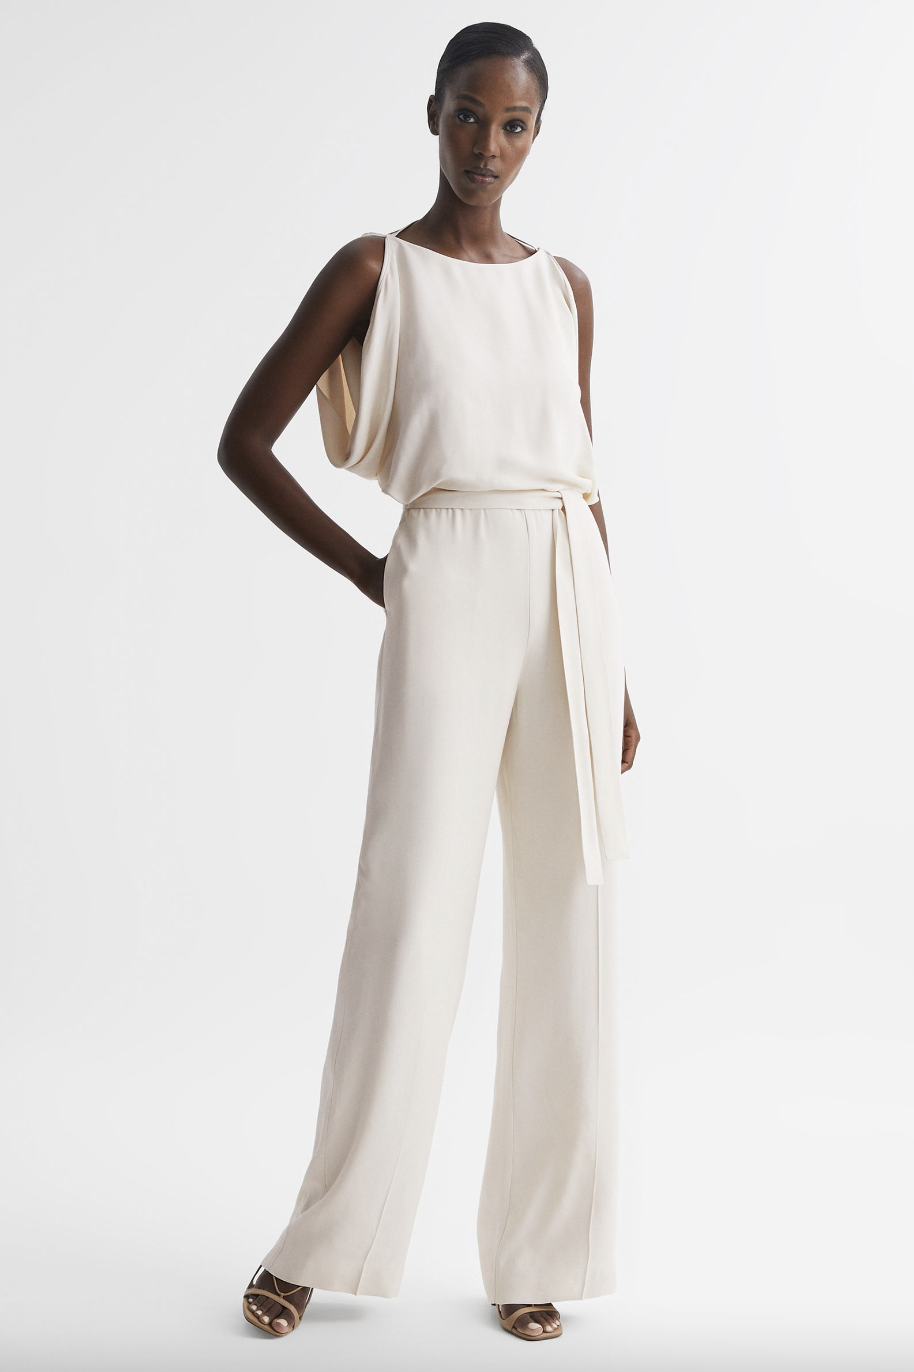 Bridal Jumpsuits for Every Event